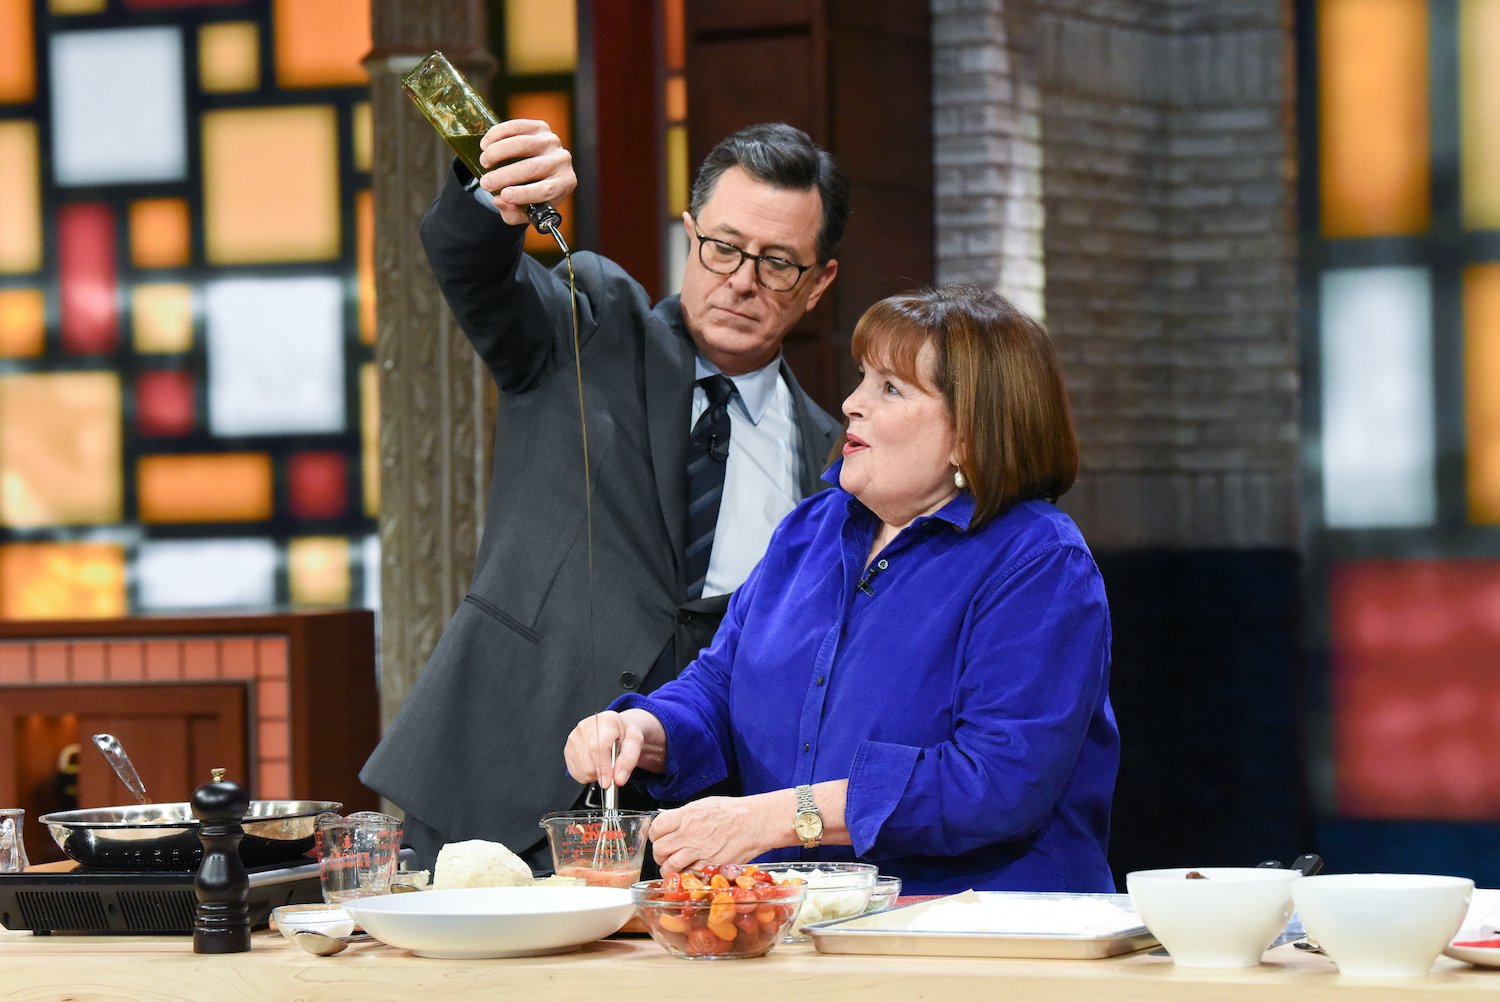 Ina Garten cooks with Stephen Colbert on The Late Show